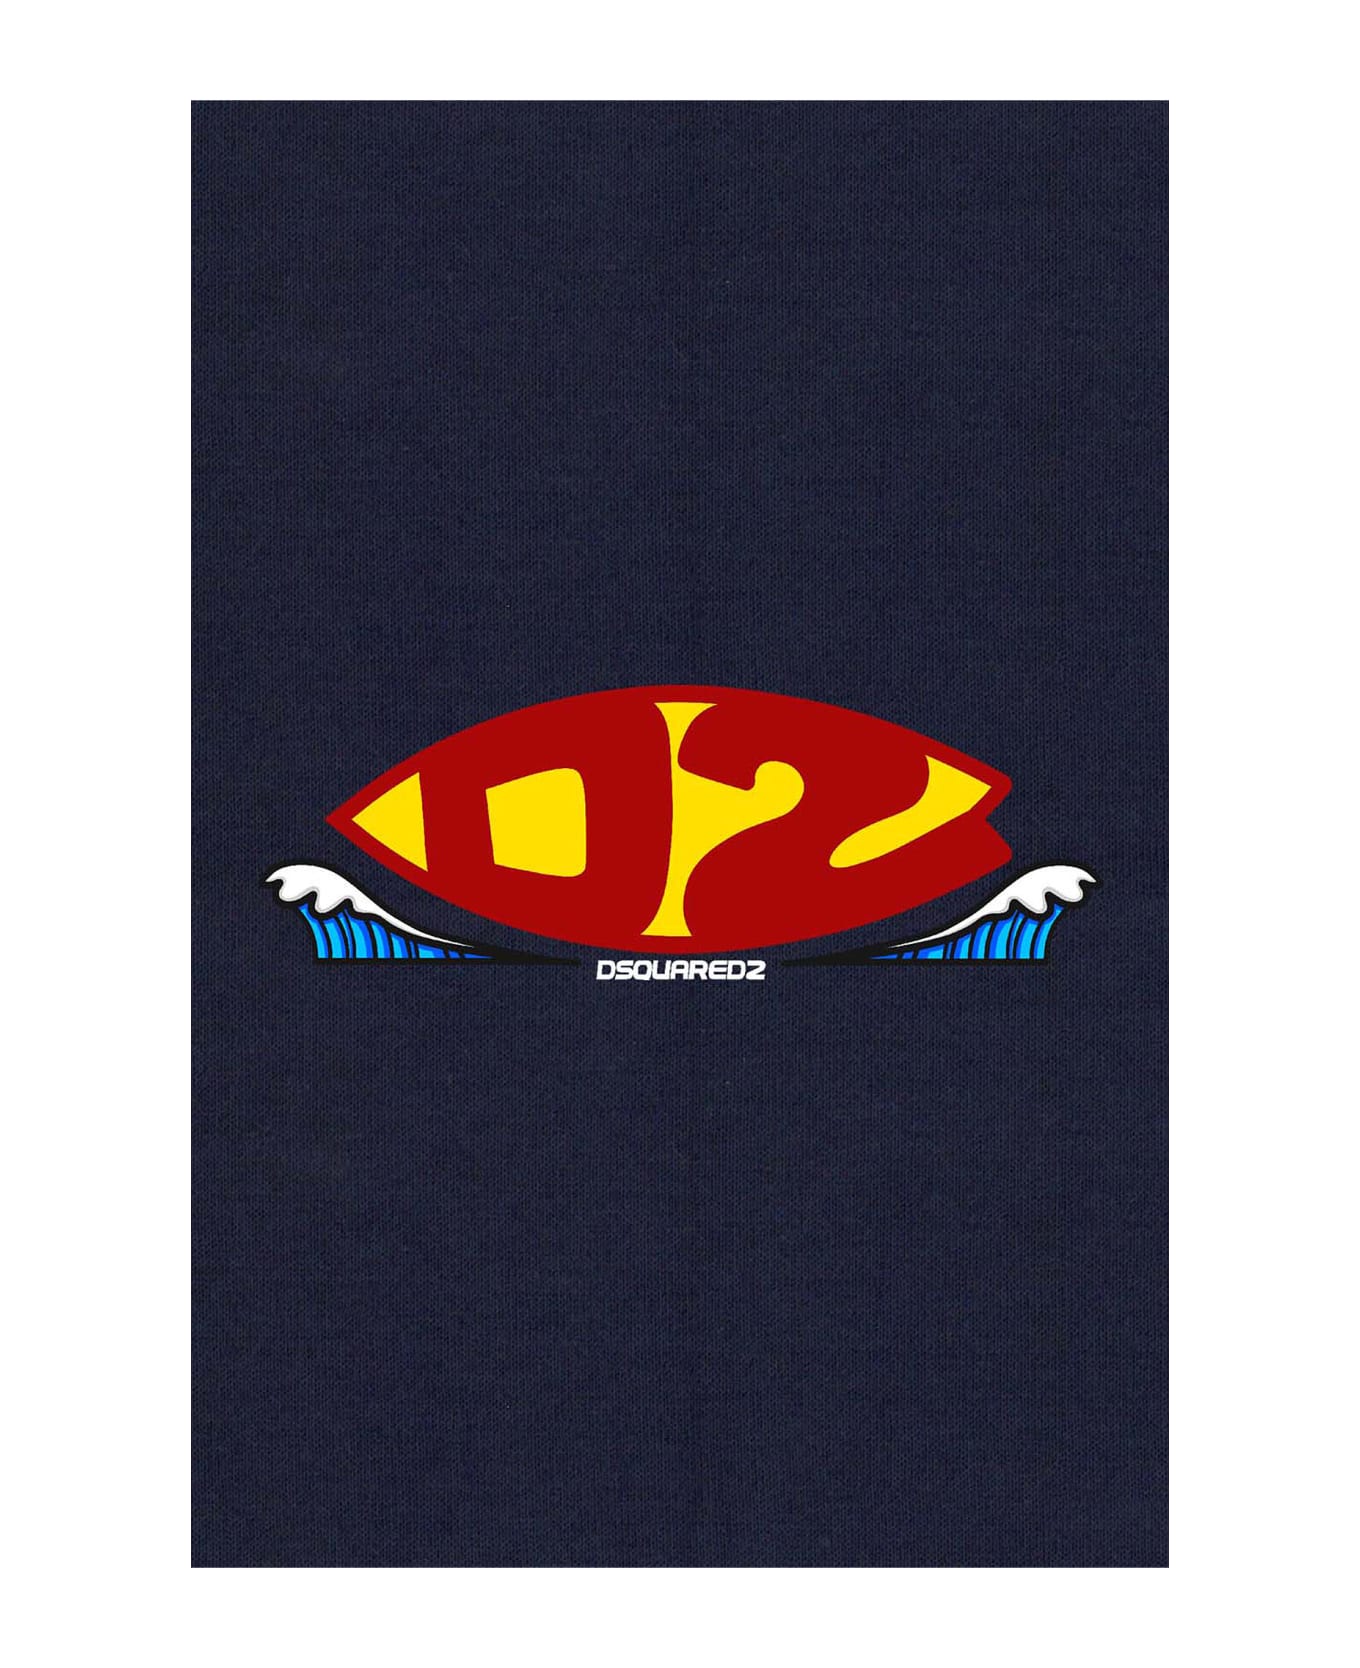 Dsquared2 T-shirts - Navy blue